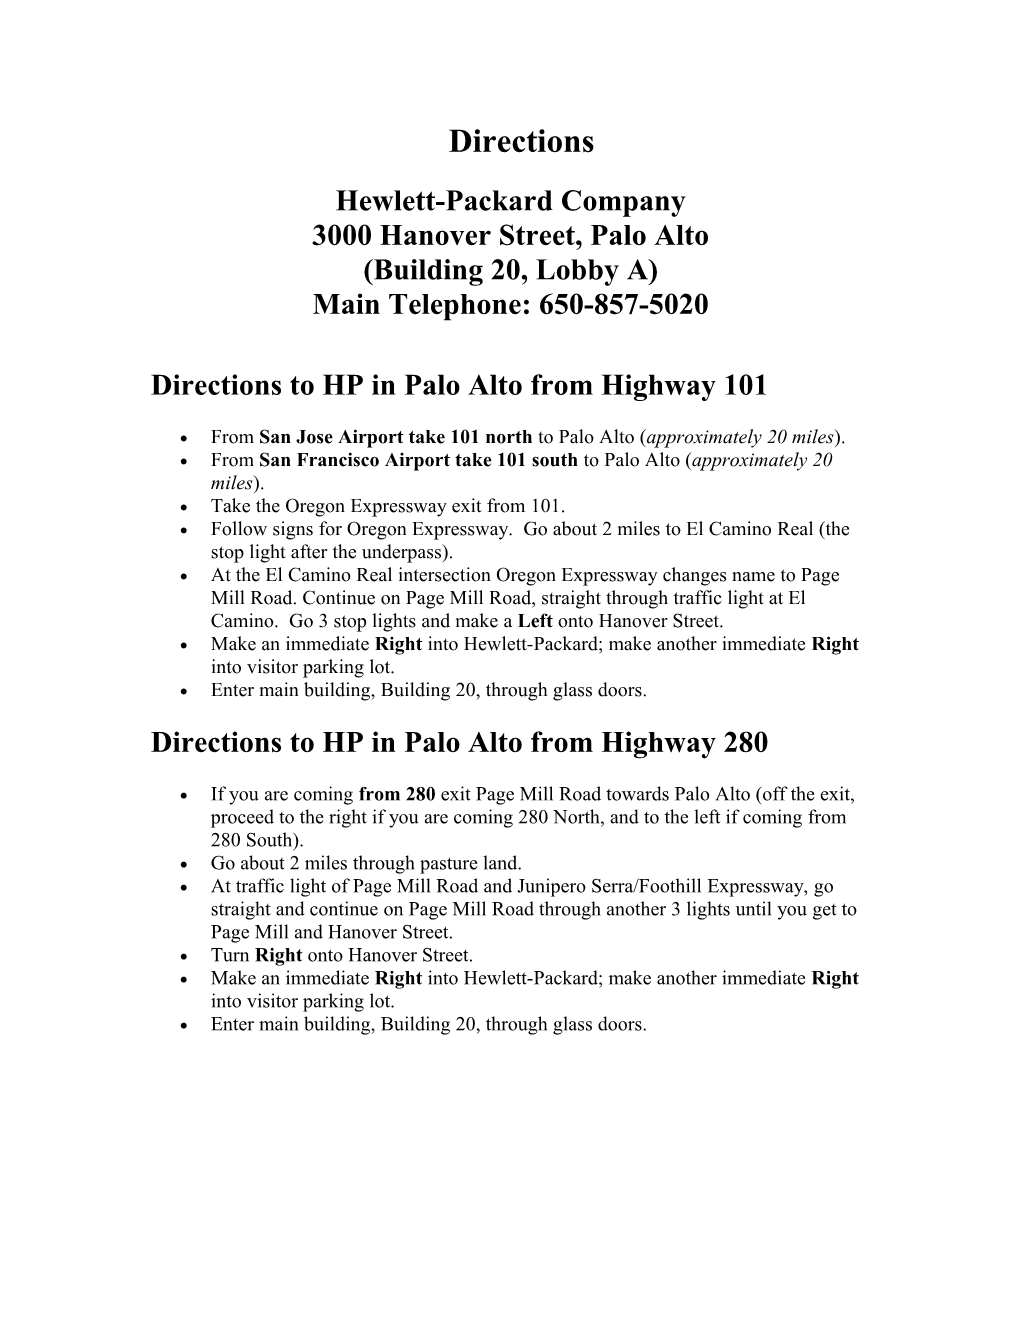 Directions to HP in Palo Alto from Highway 101